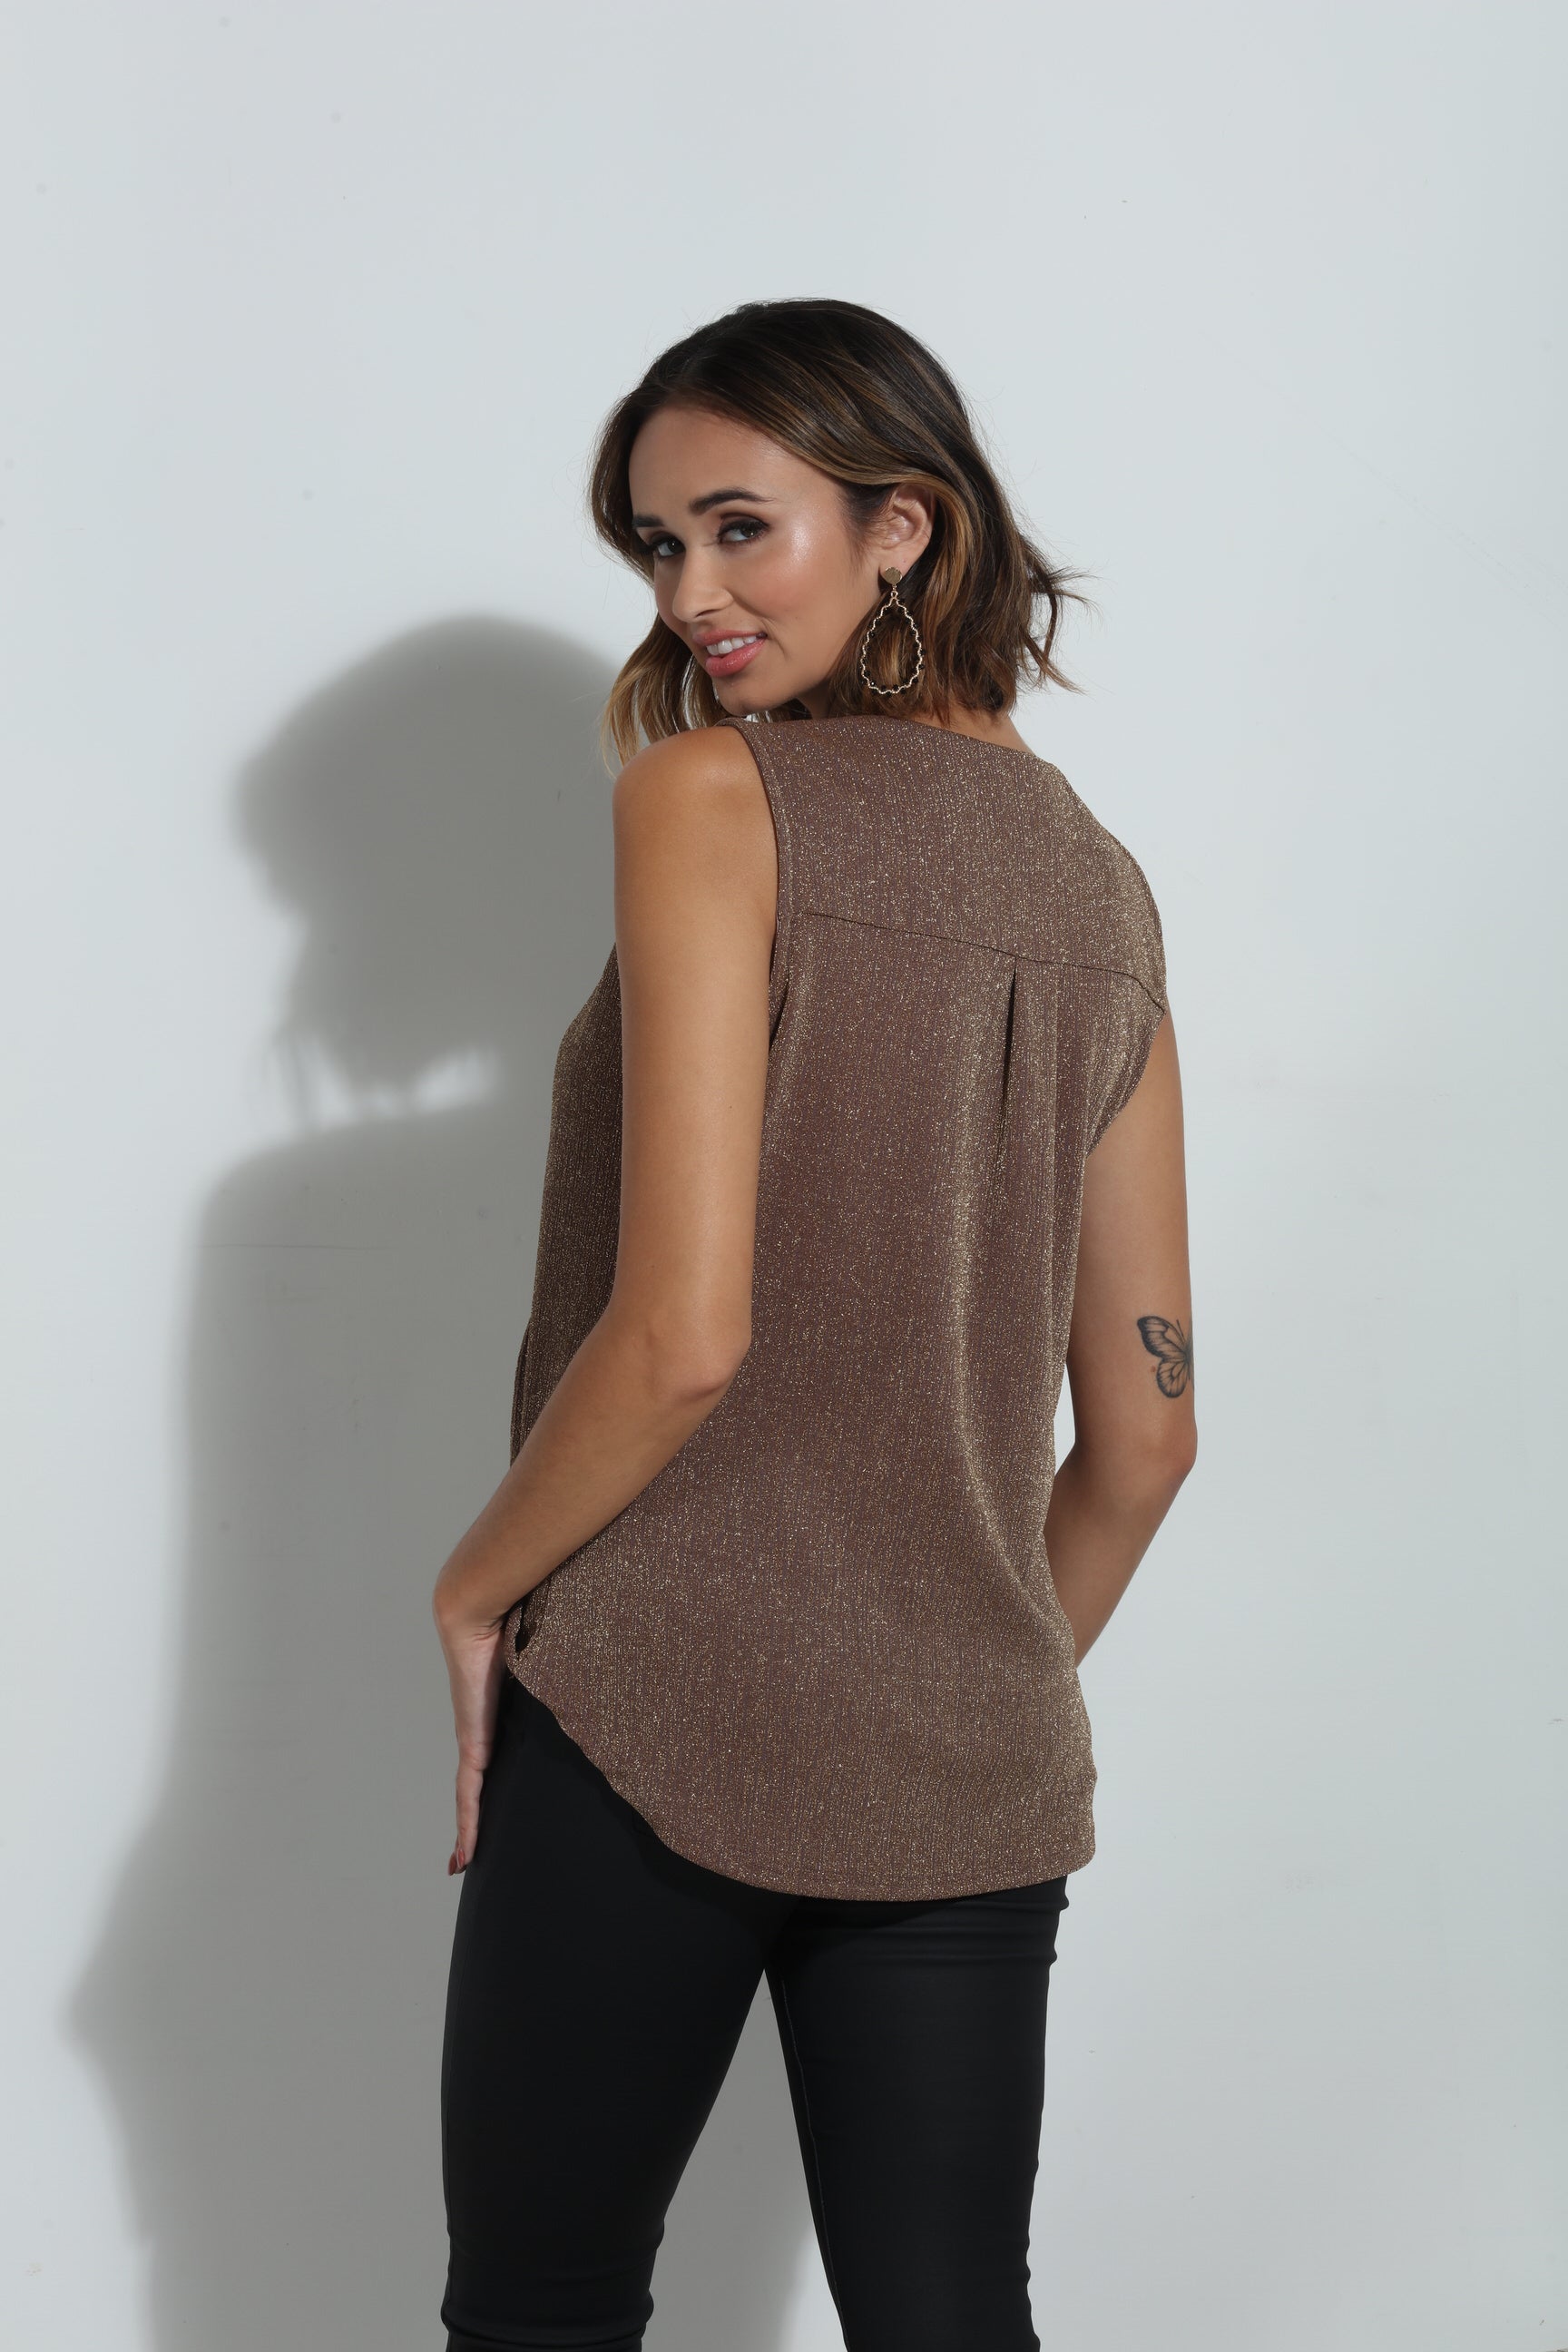 The Everyday Surplice Tank-Cocoa & Gold Sparkle -BEST SELLER